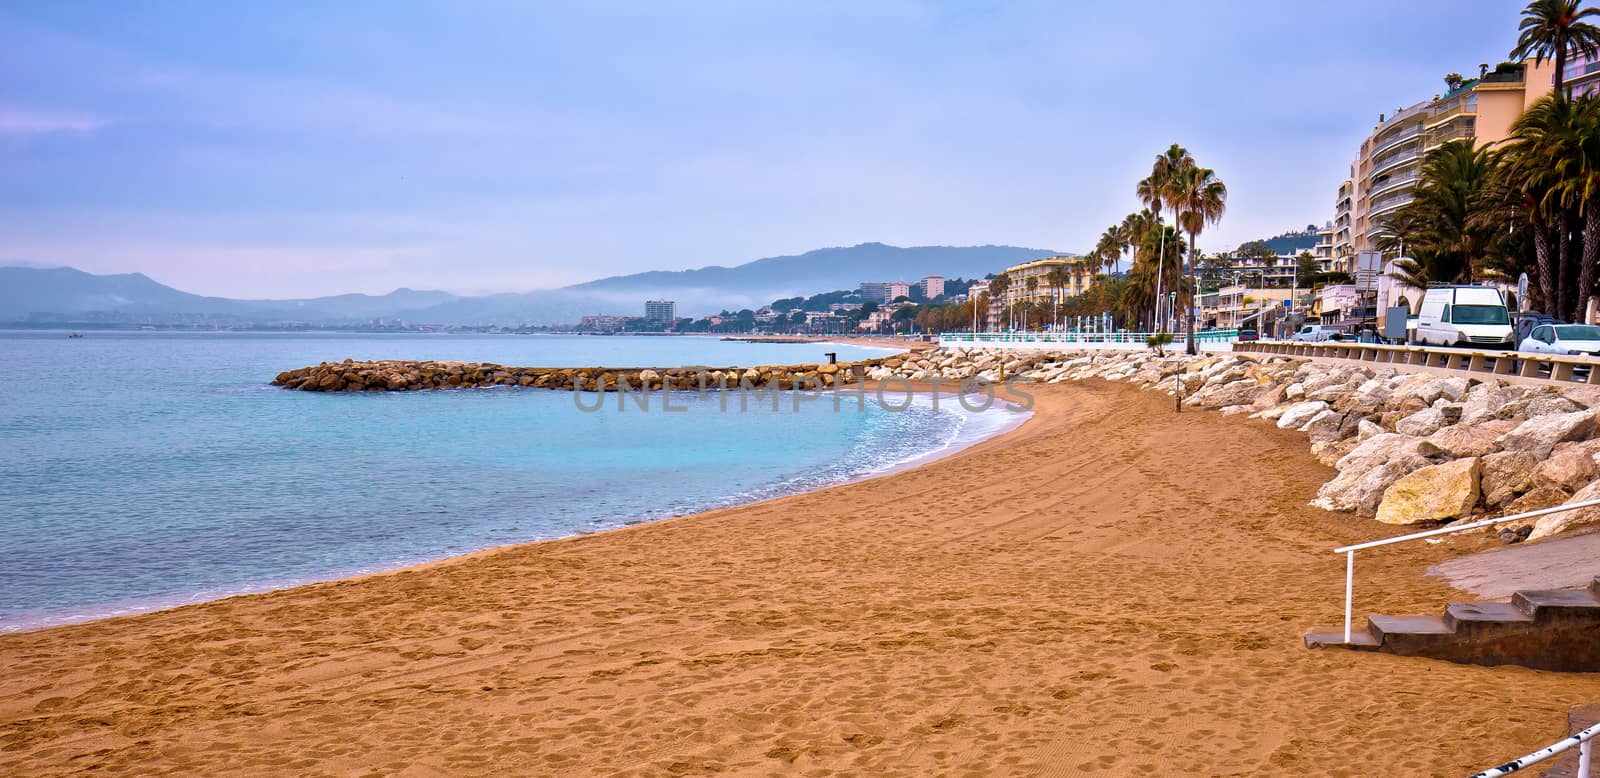 Cannes sand beach and palm waterfront panoramic view by xbrchx